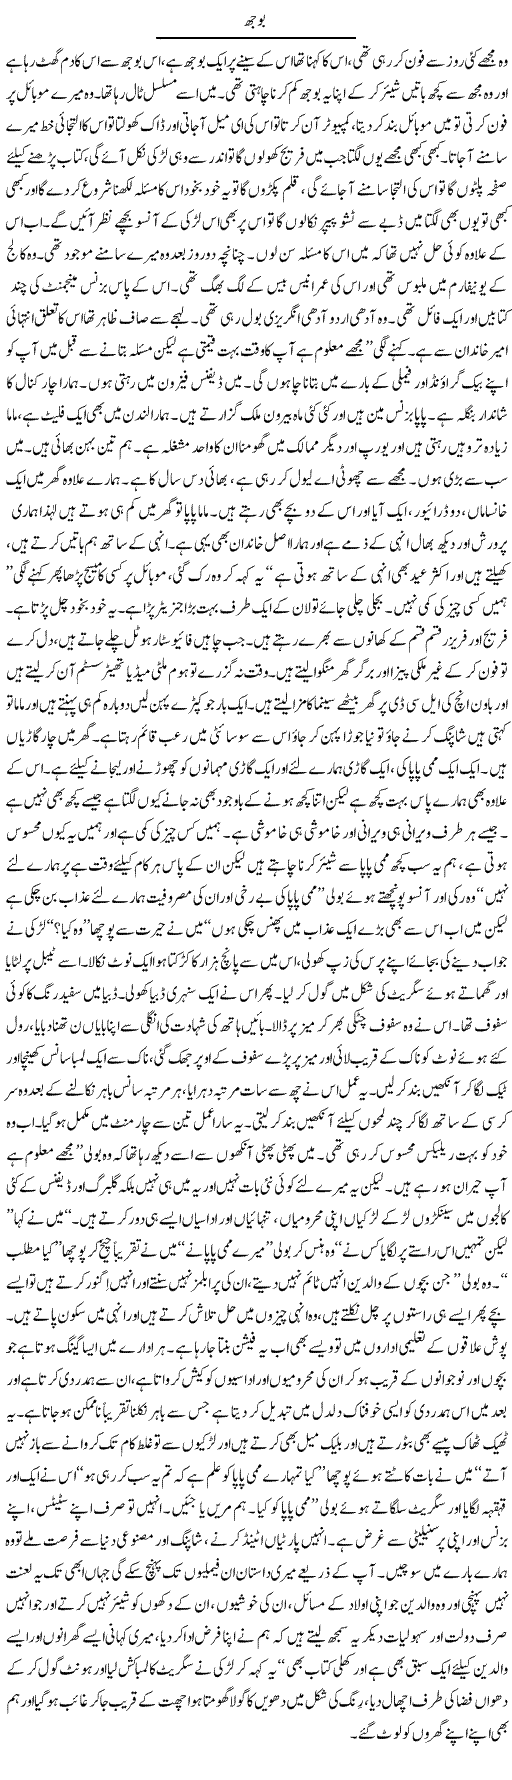 Pressure Express Column Amad Chaudhry 24 October 2010